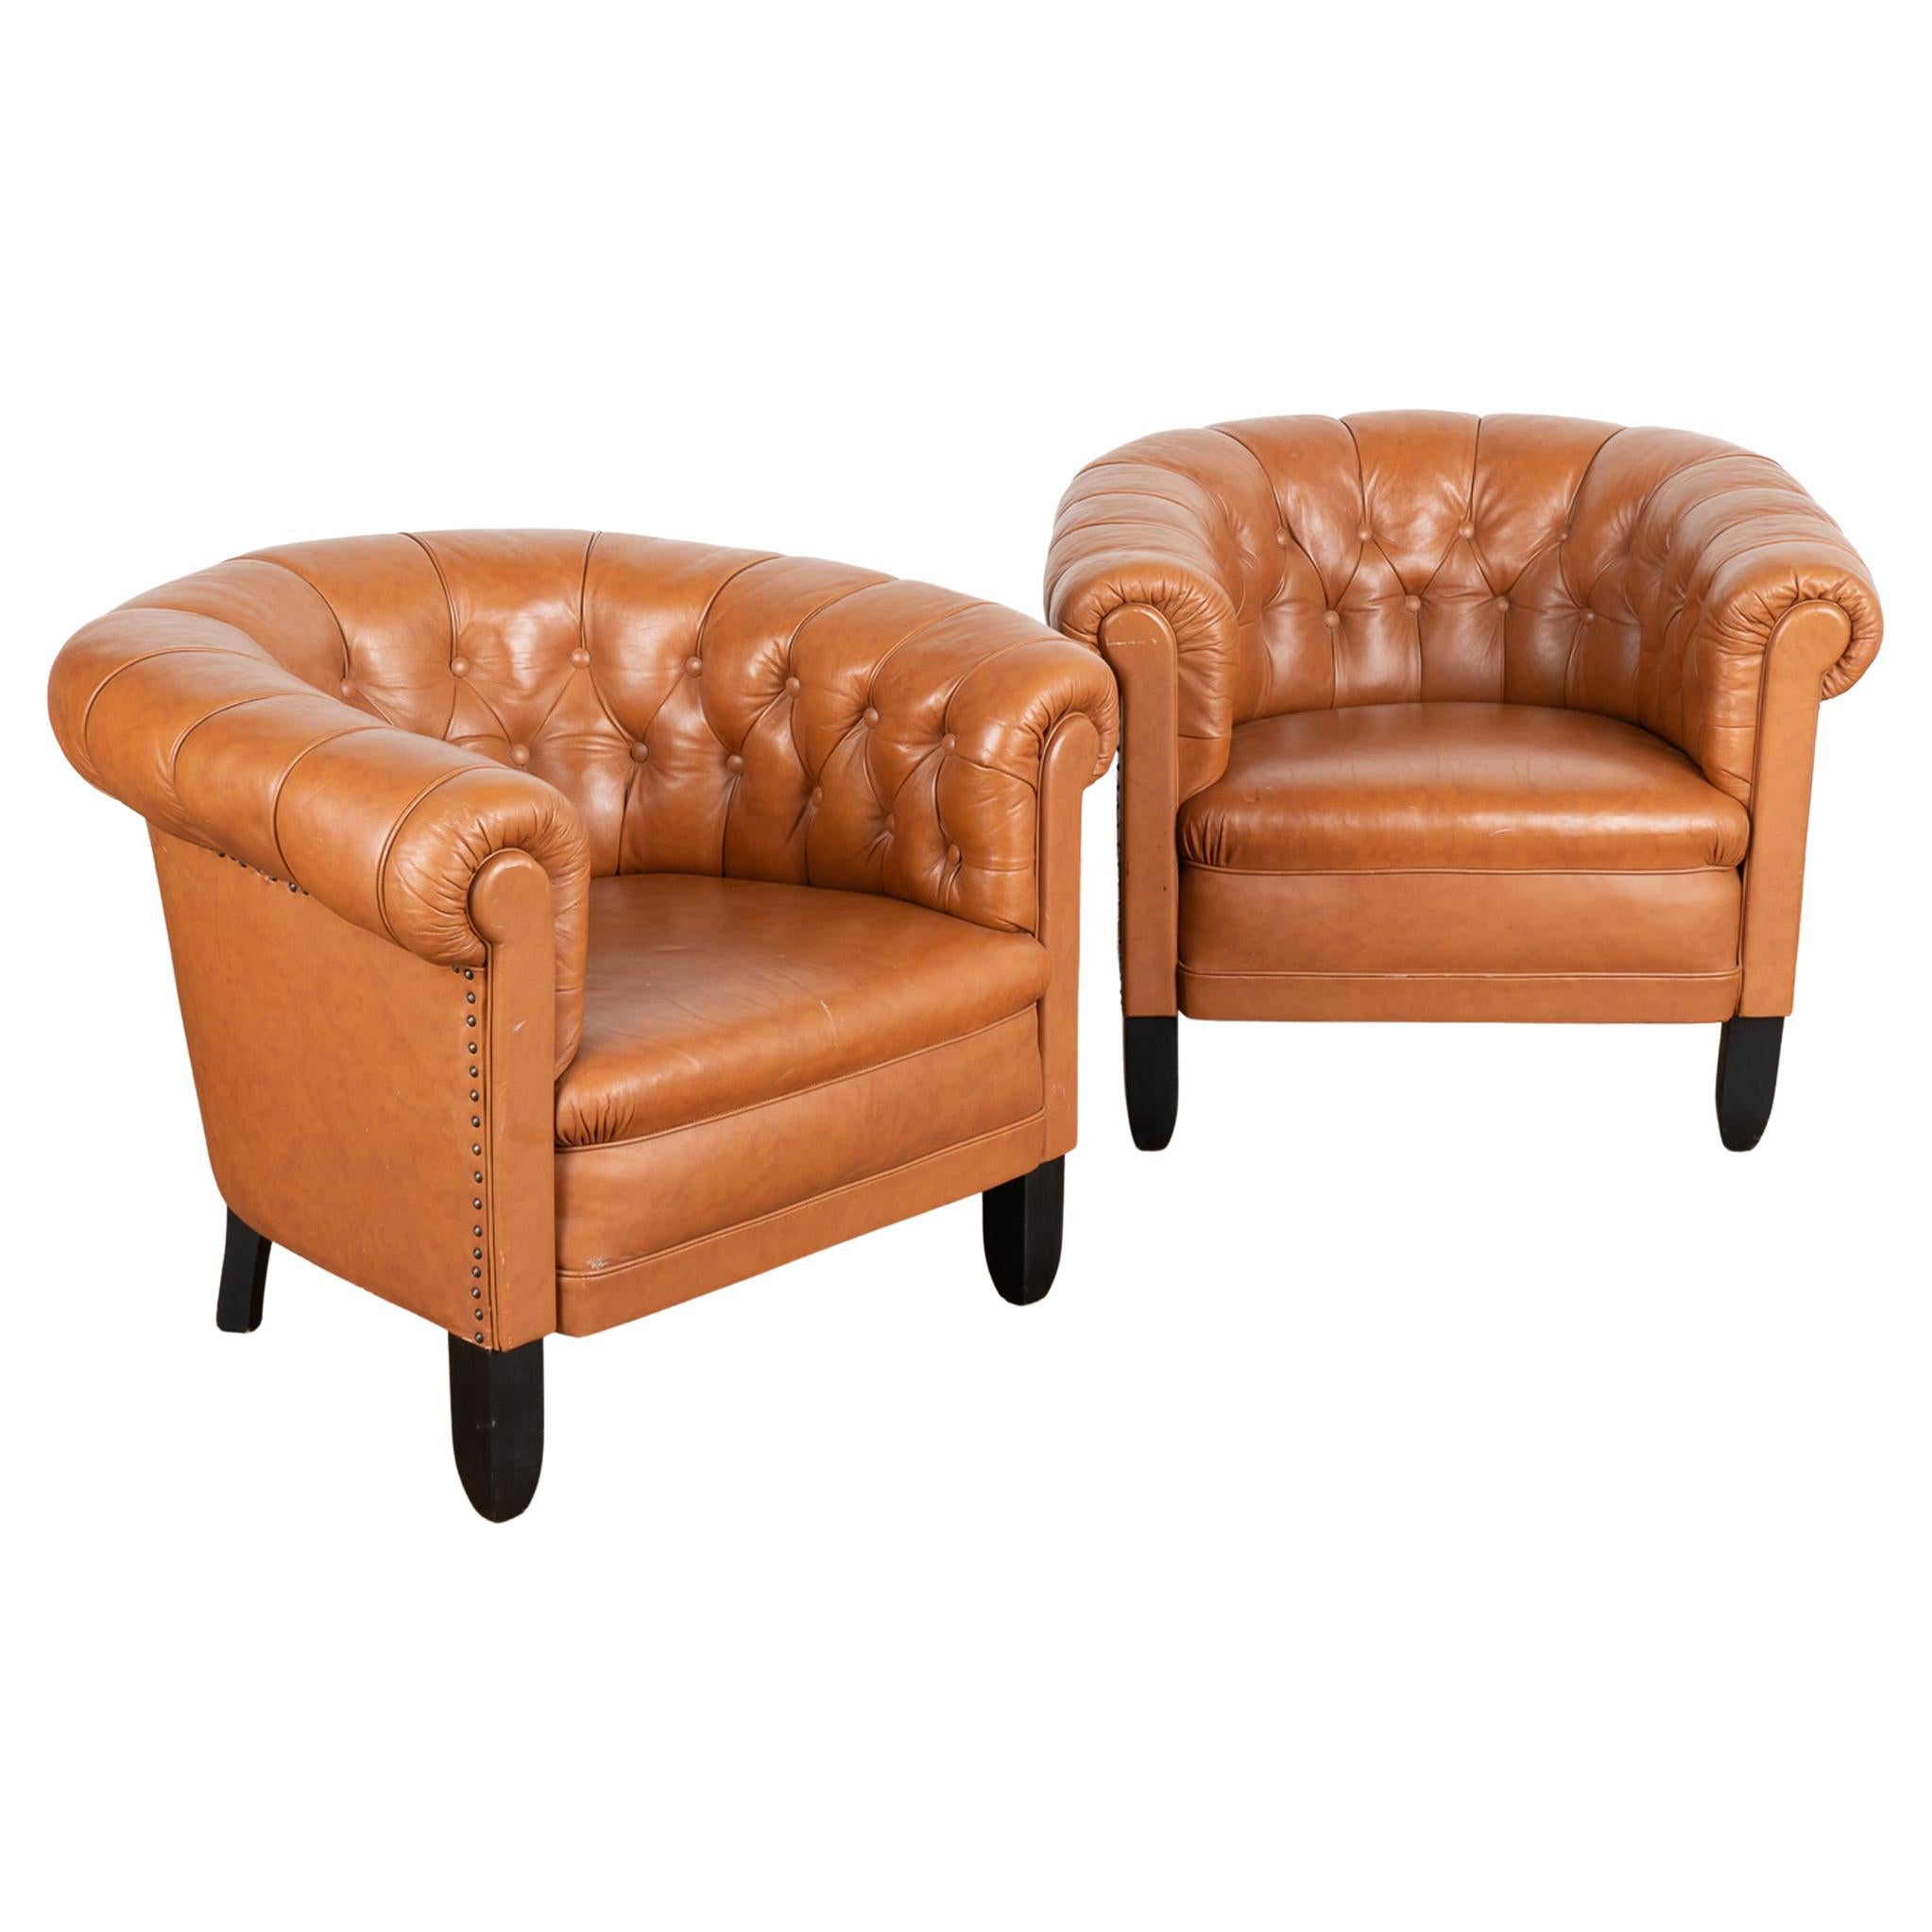 Pair, Vintage Brown Leather Barrel Back Arm Chairs, Denmark circa 1940